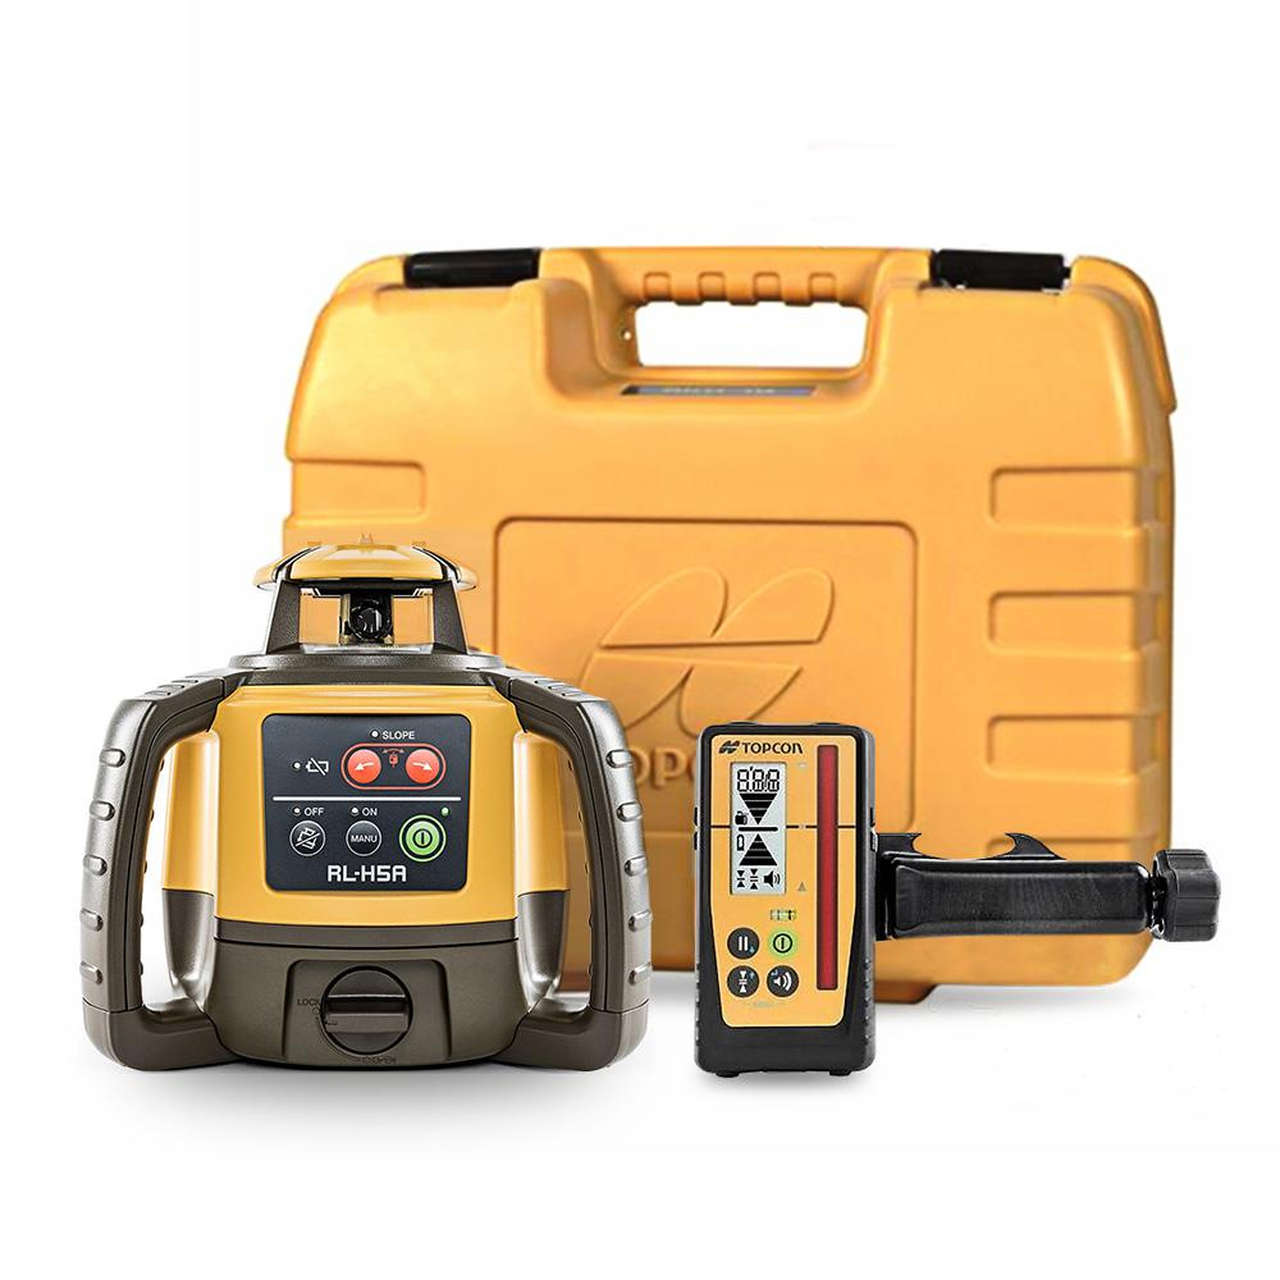 Topcon RL-H5A Horizontal Self-Leveling Rotary Laser w/ LS-100D Receiver & Rechargeable Battery (1021200-16)